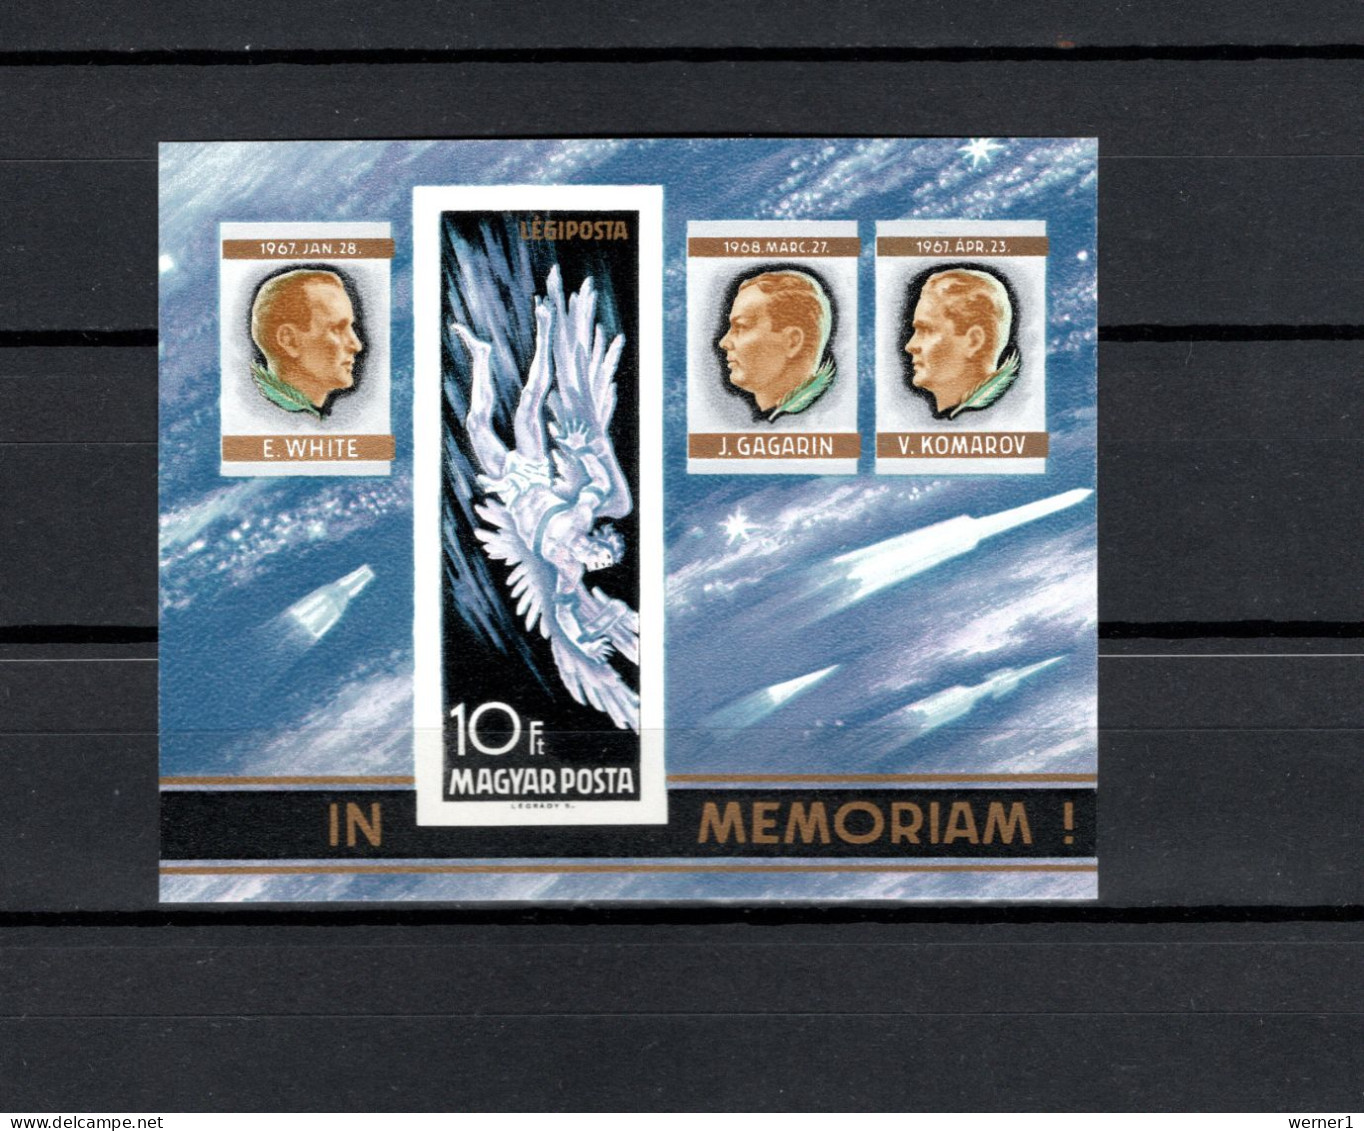 Hungary 1968 Space, Dead Cosmonauts And Astronauts, E.White, Y.Gagarin, V.Komarov S/s Imperf. MNH -scarce- - Europe